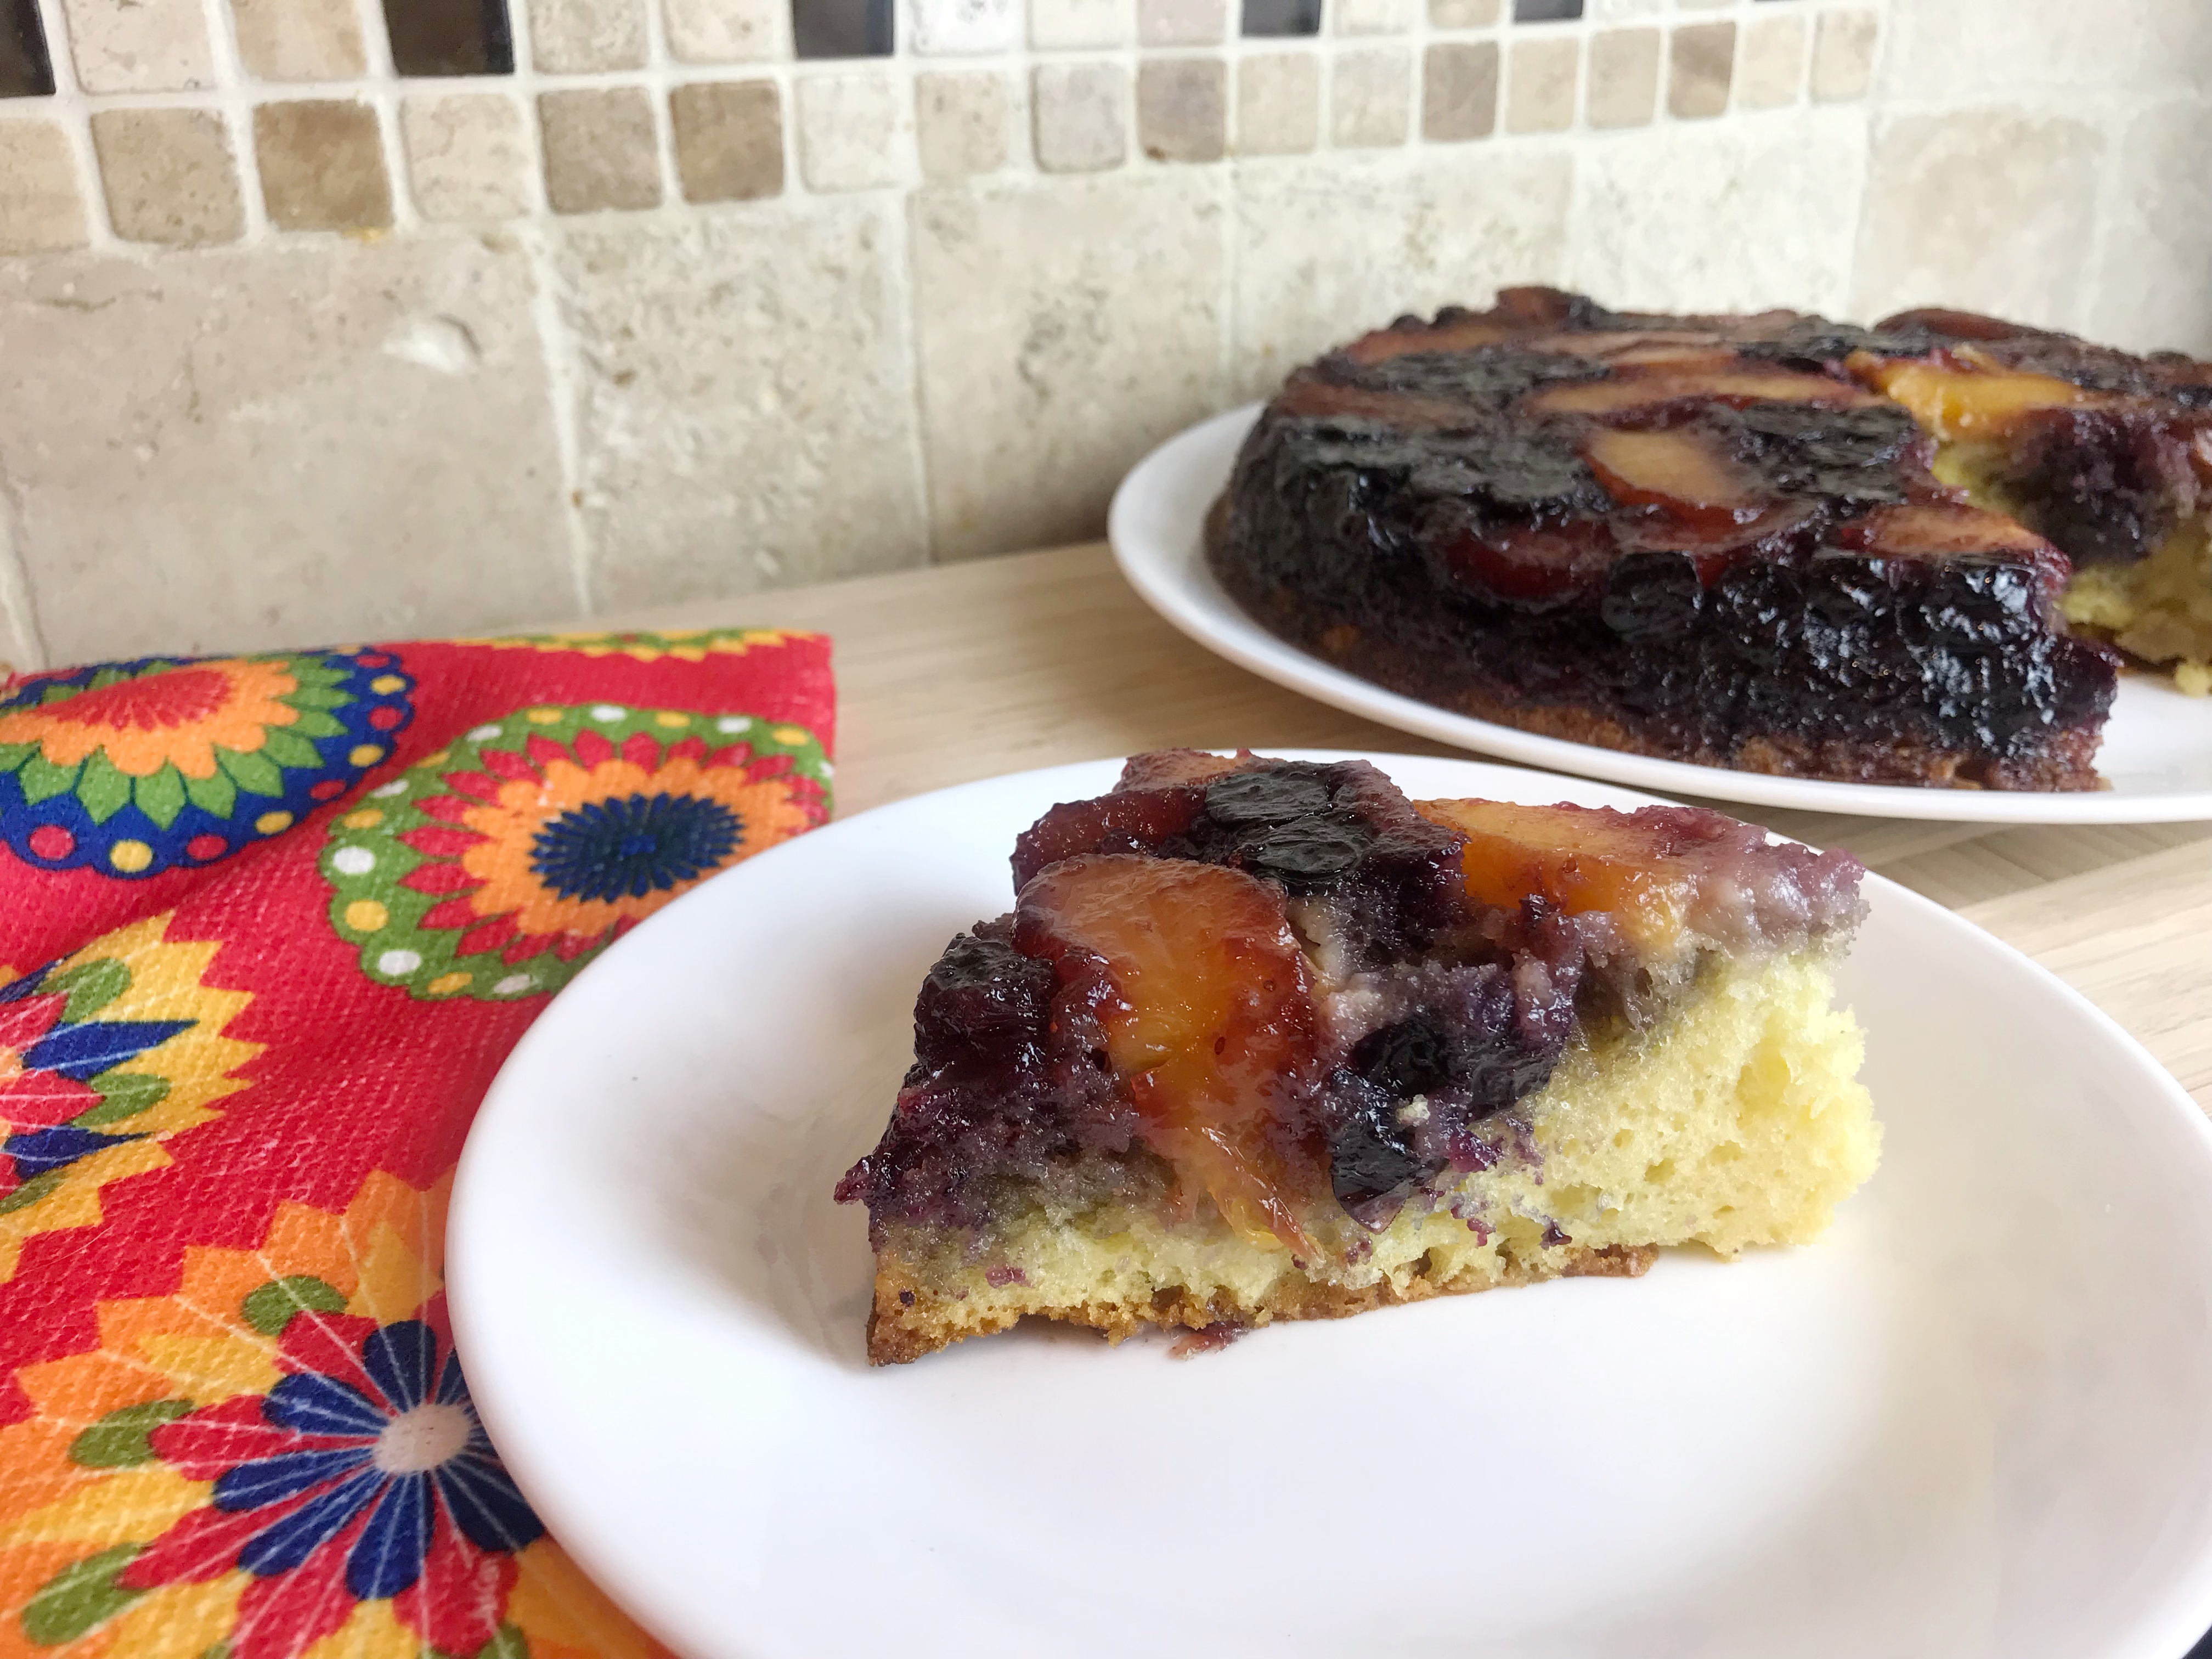 Peach blueberry upside down cake recipe with floral hand towel.